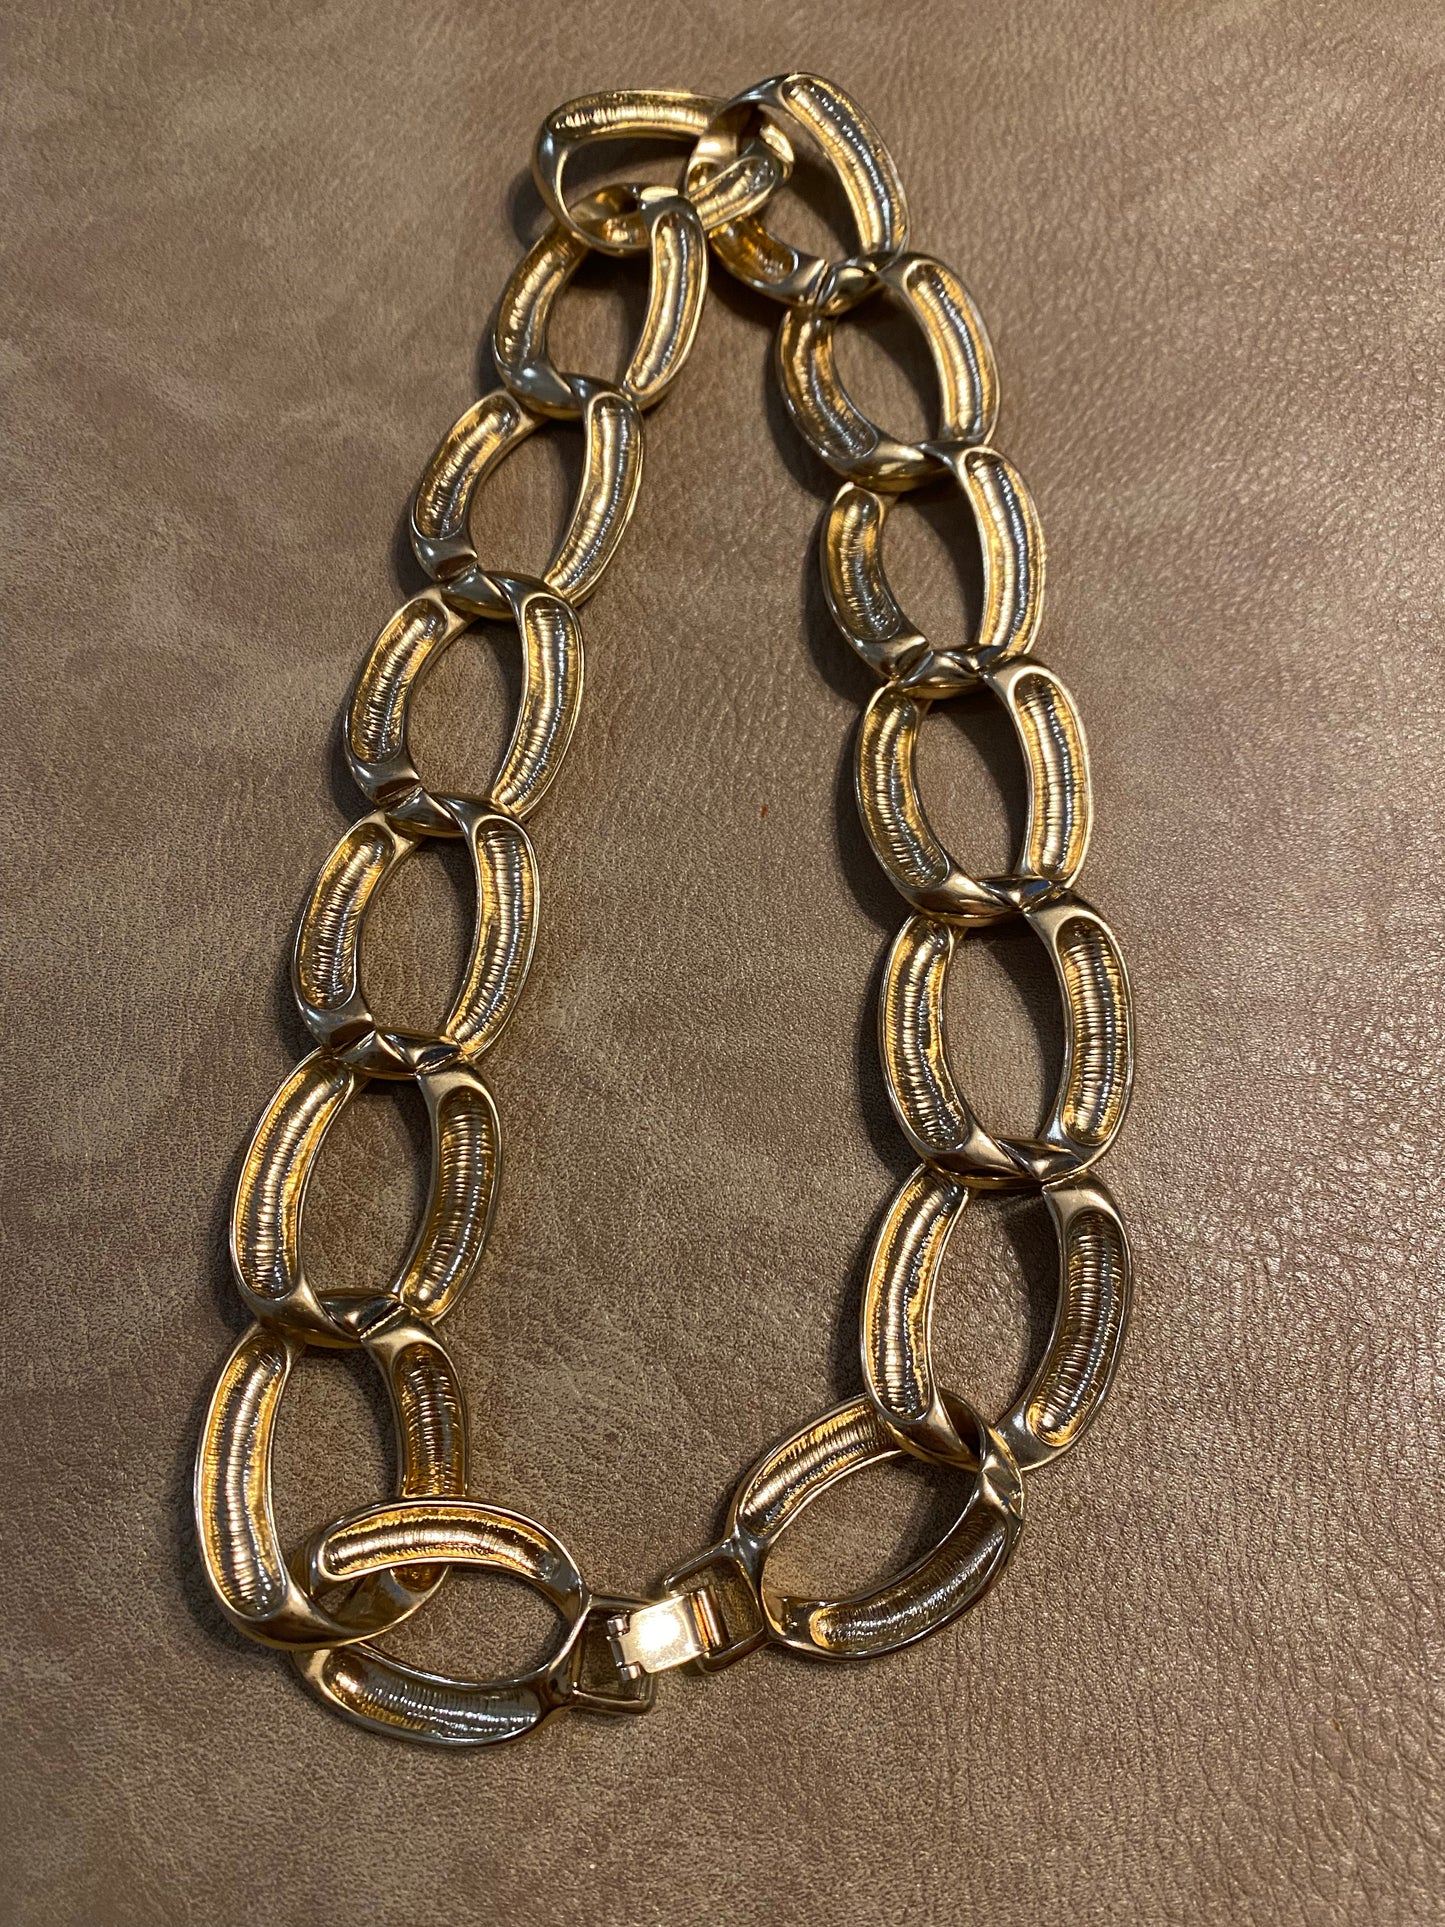 Gold chain link necklace, 1970’s